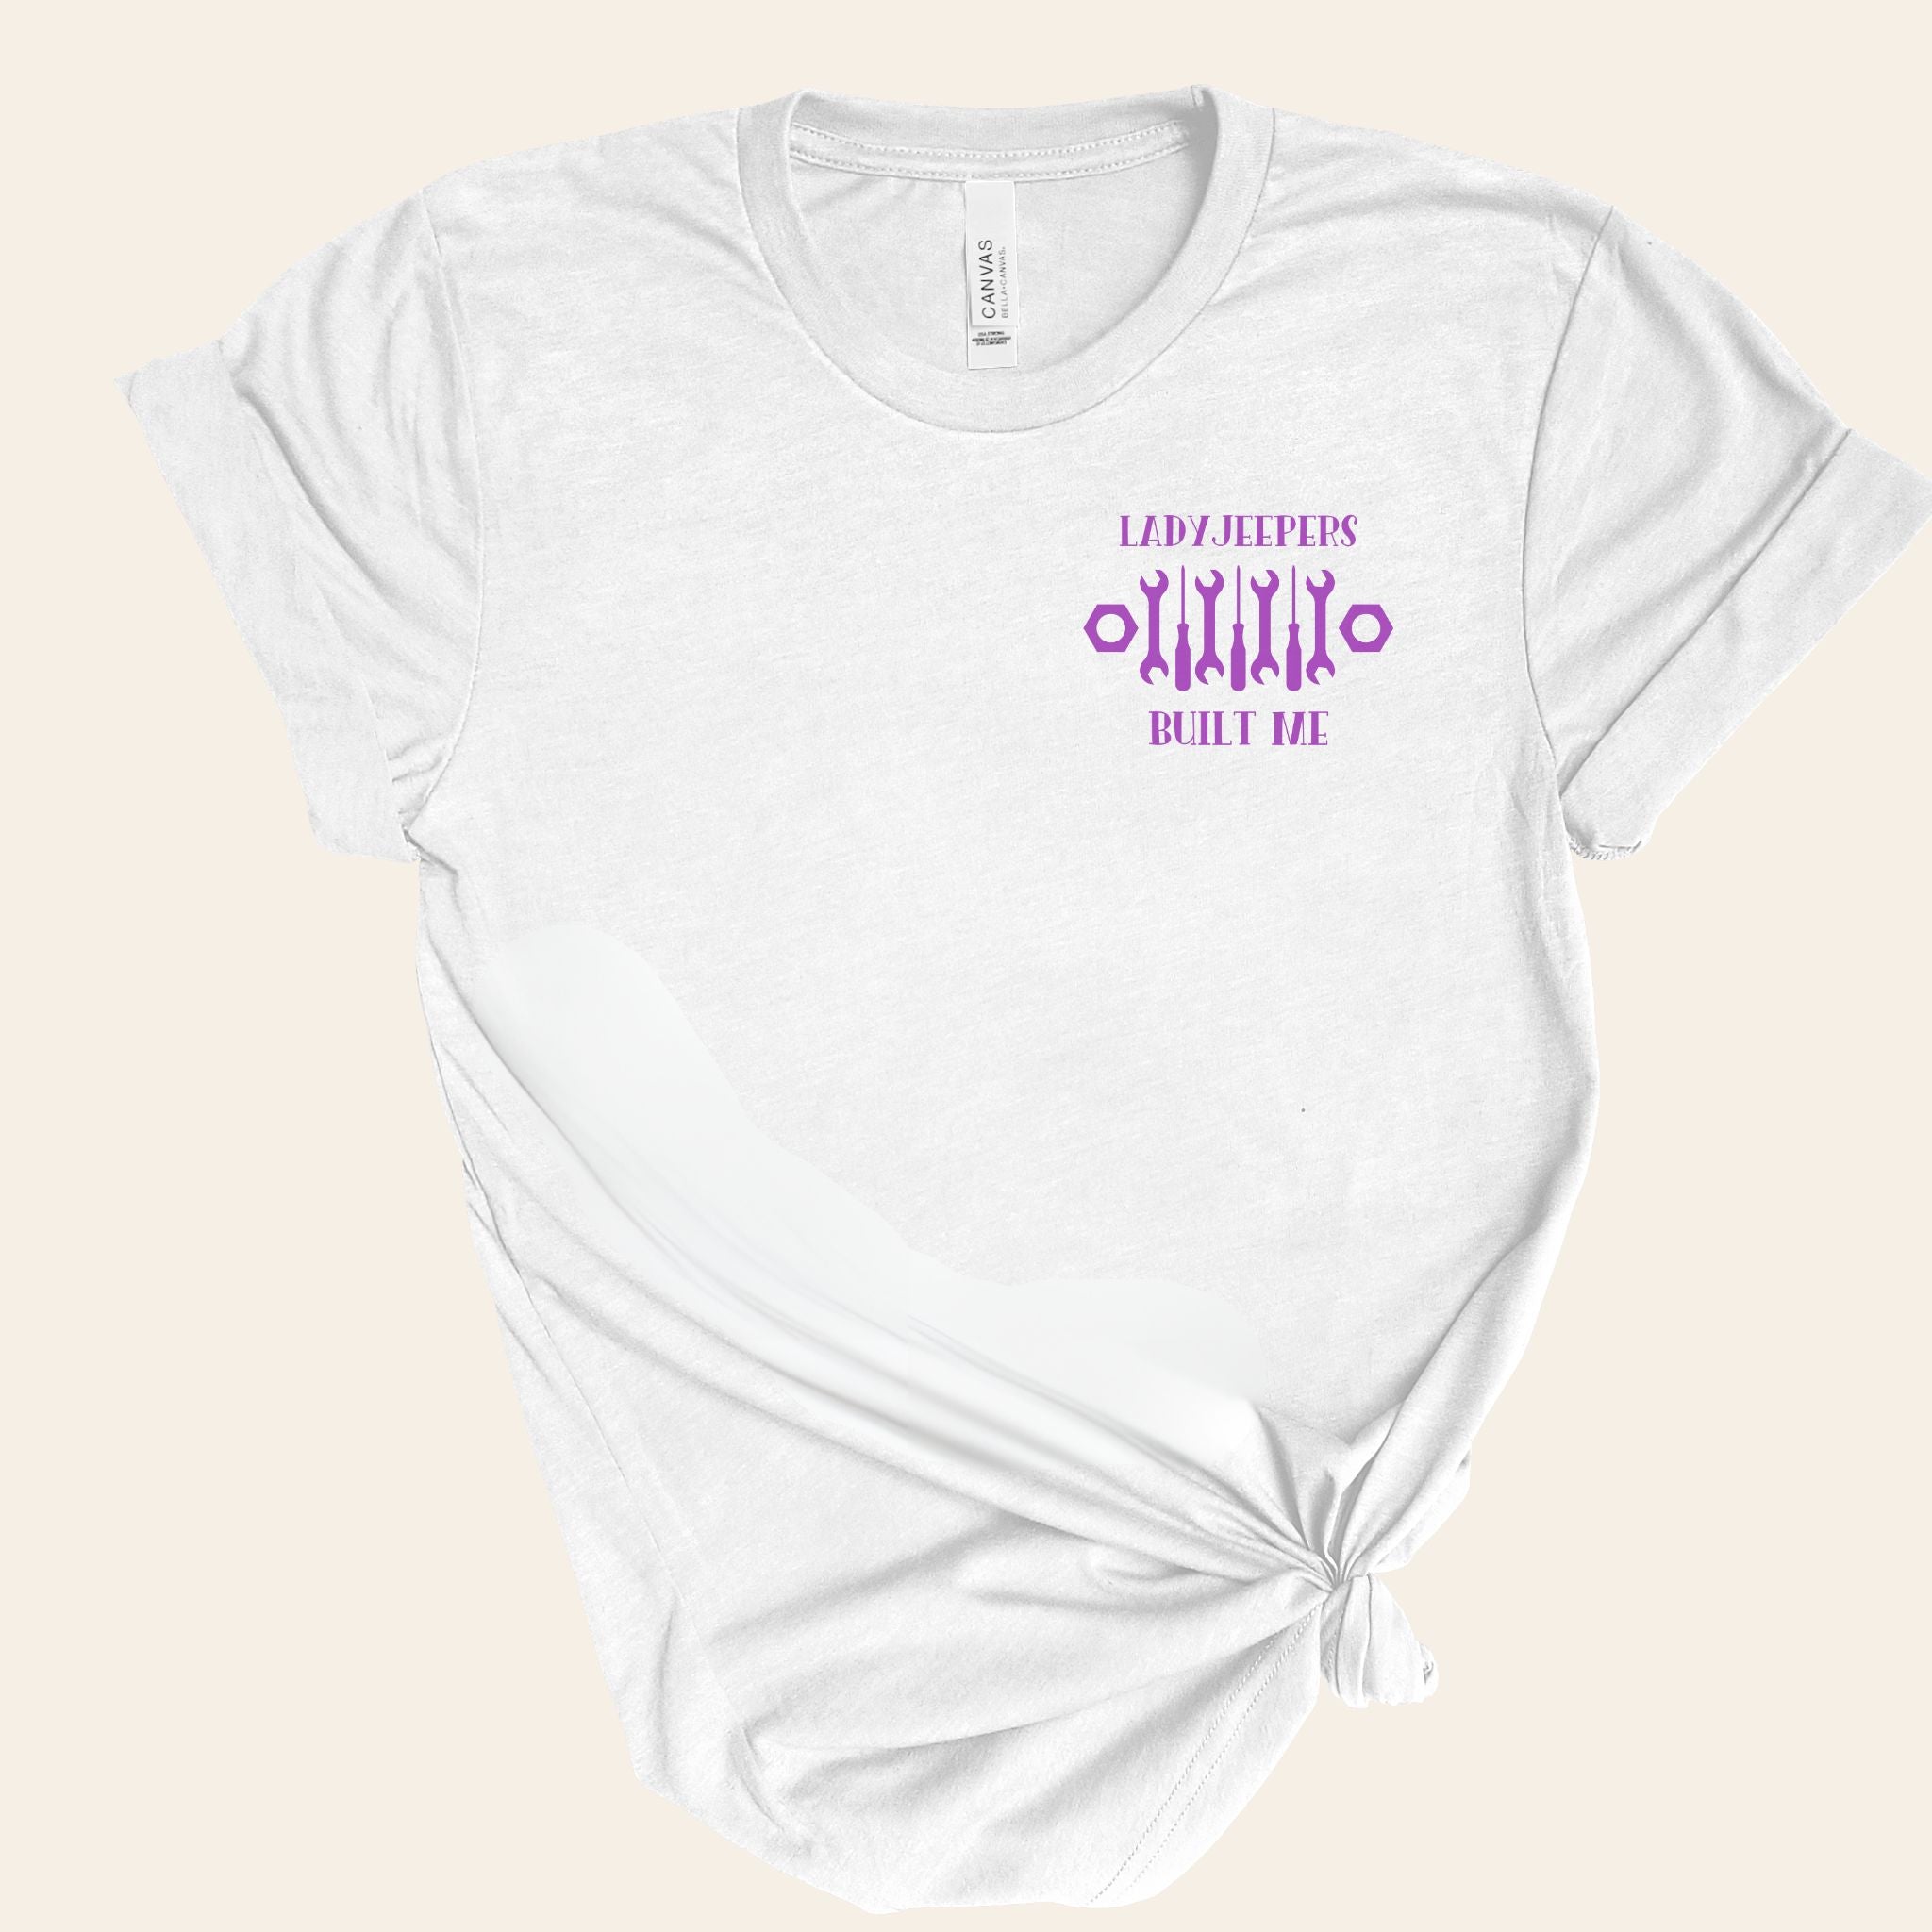 LadyJeepers Built Me Short Sleeve T-Shirt